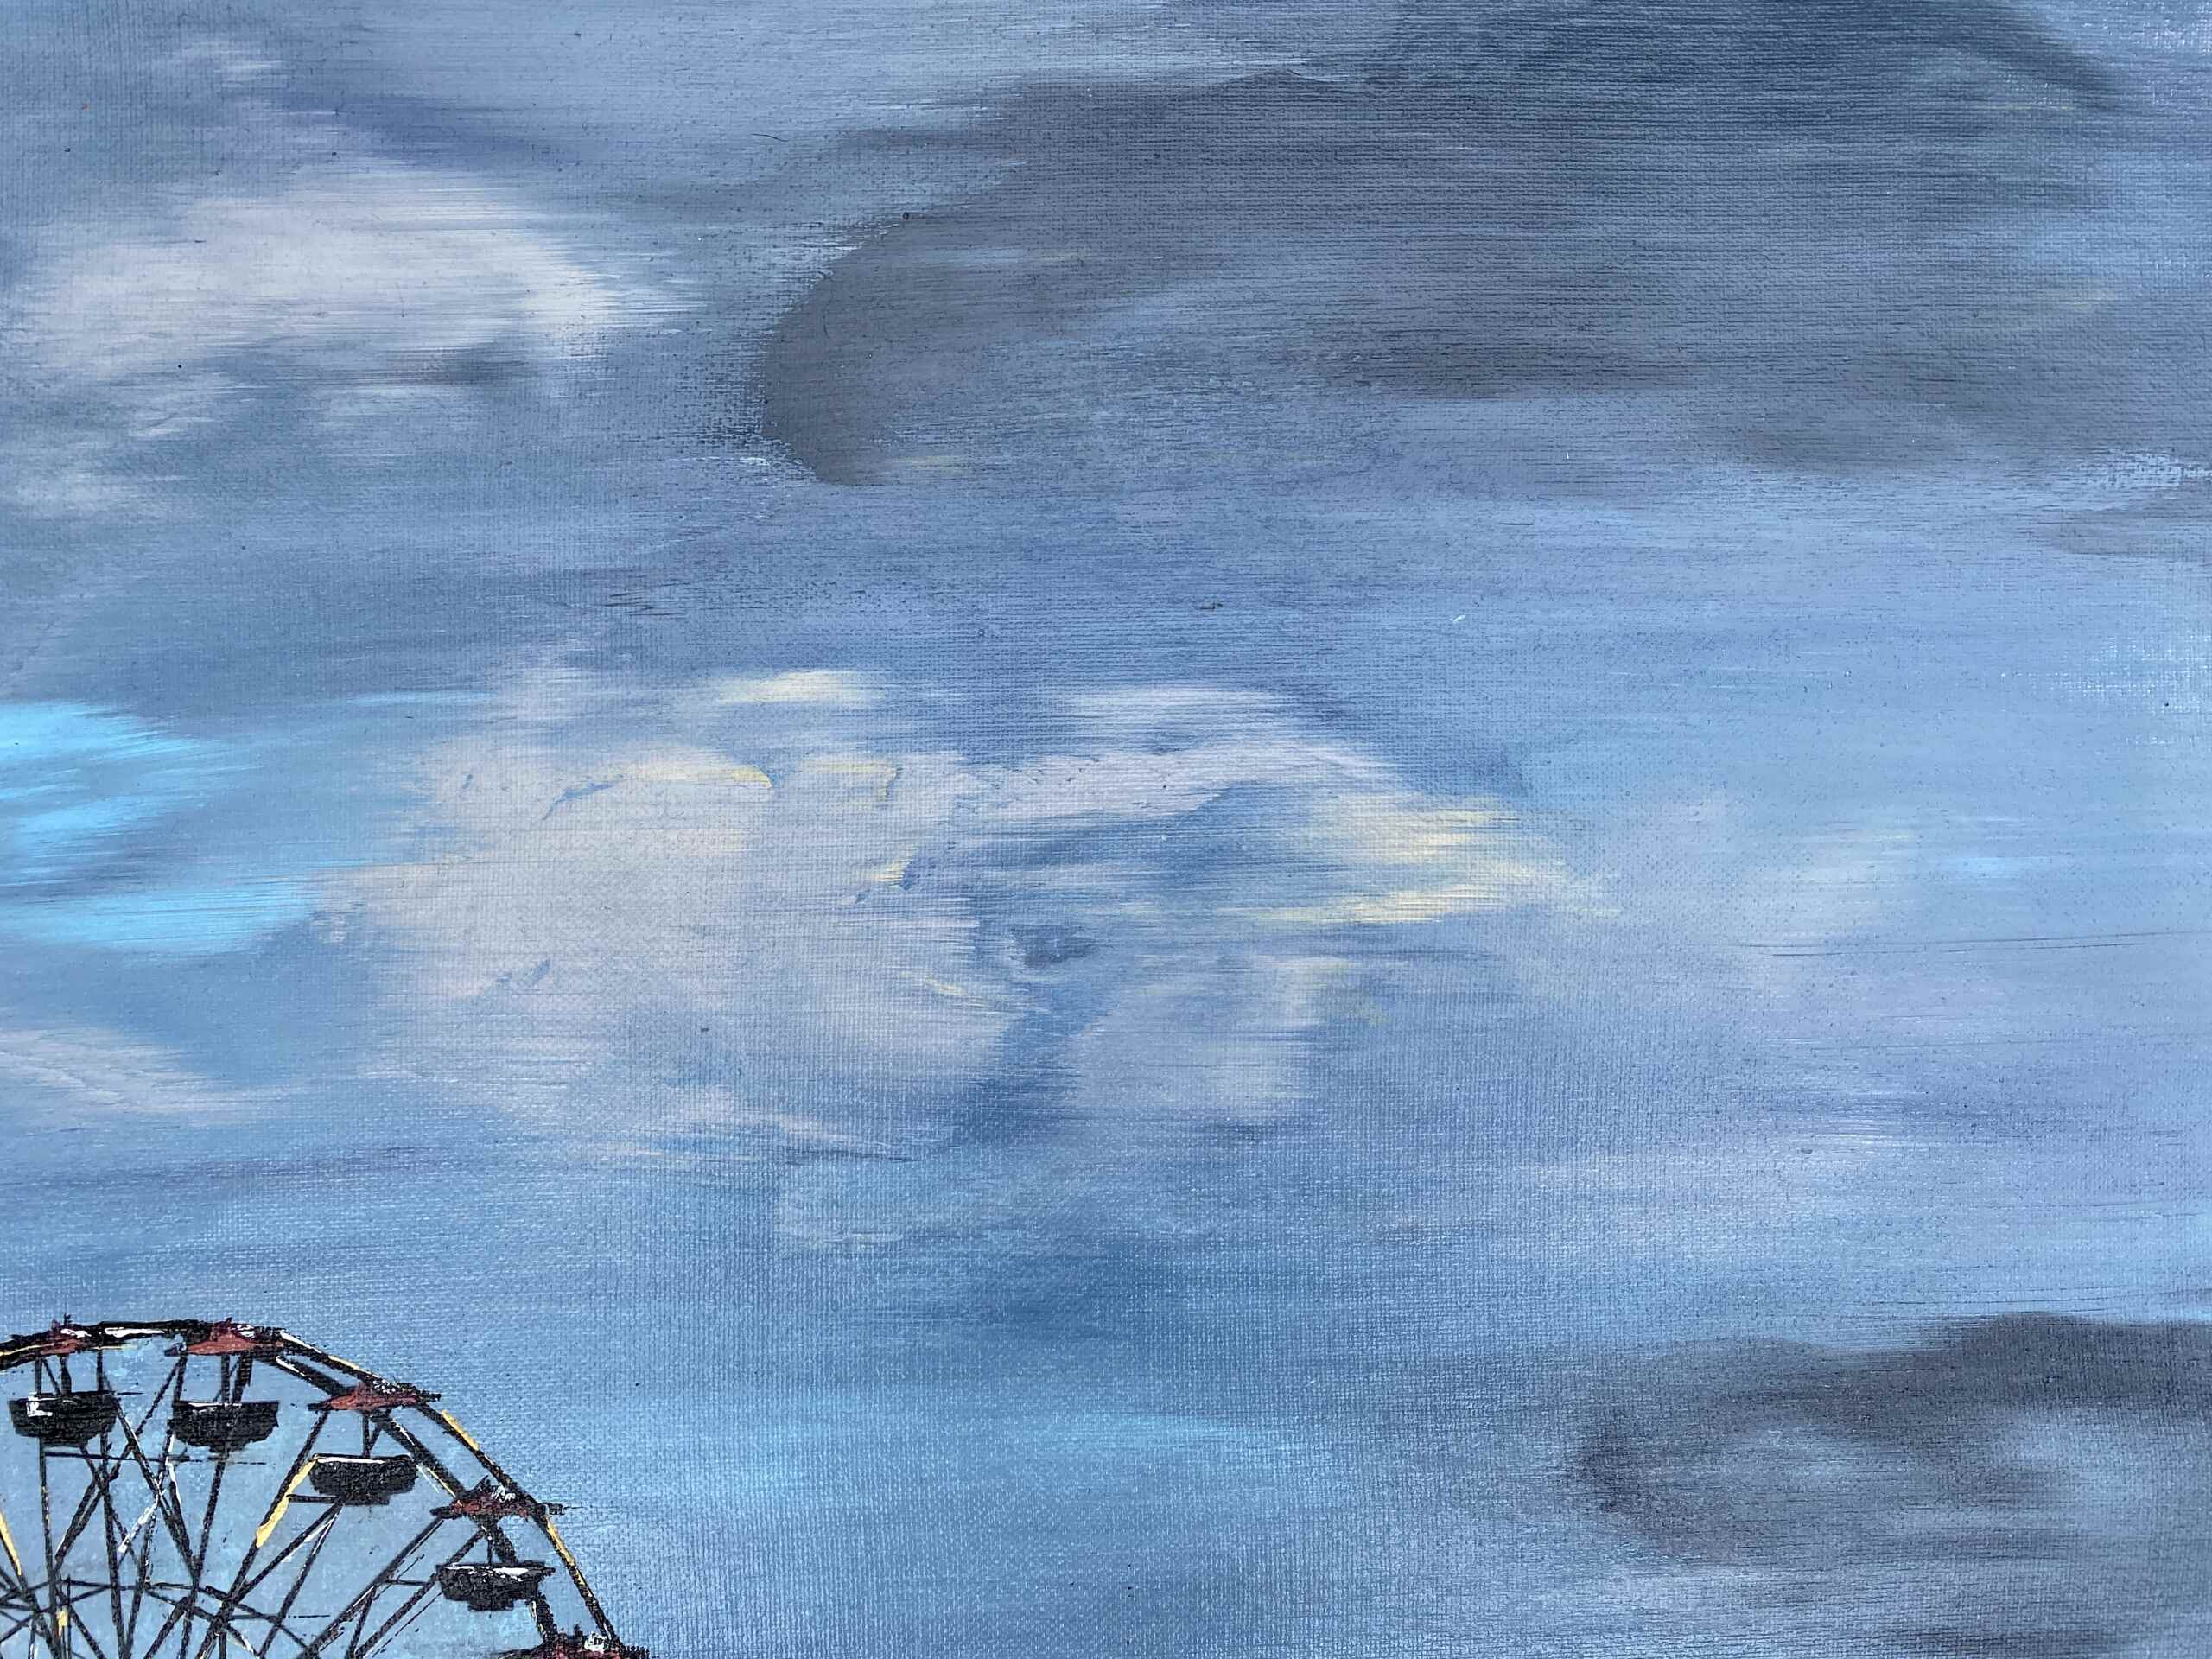 Detail of artwork "Sky View" by Nina Groth